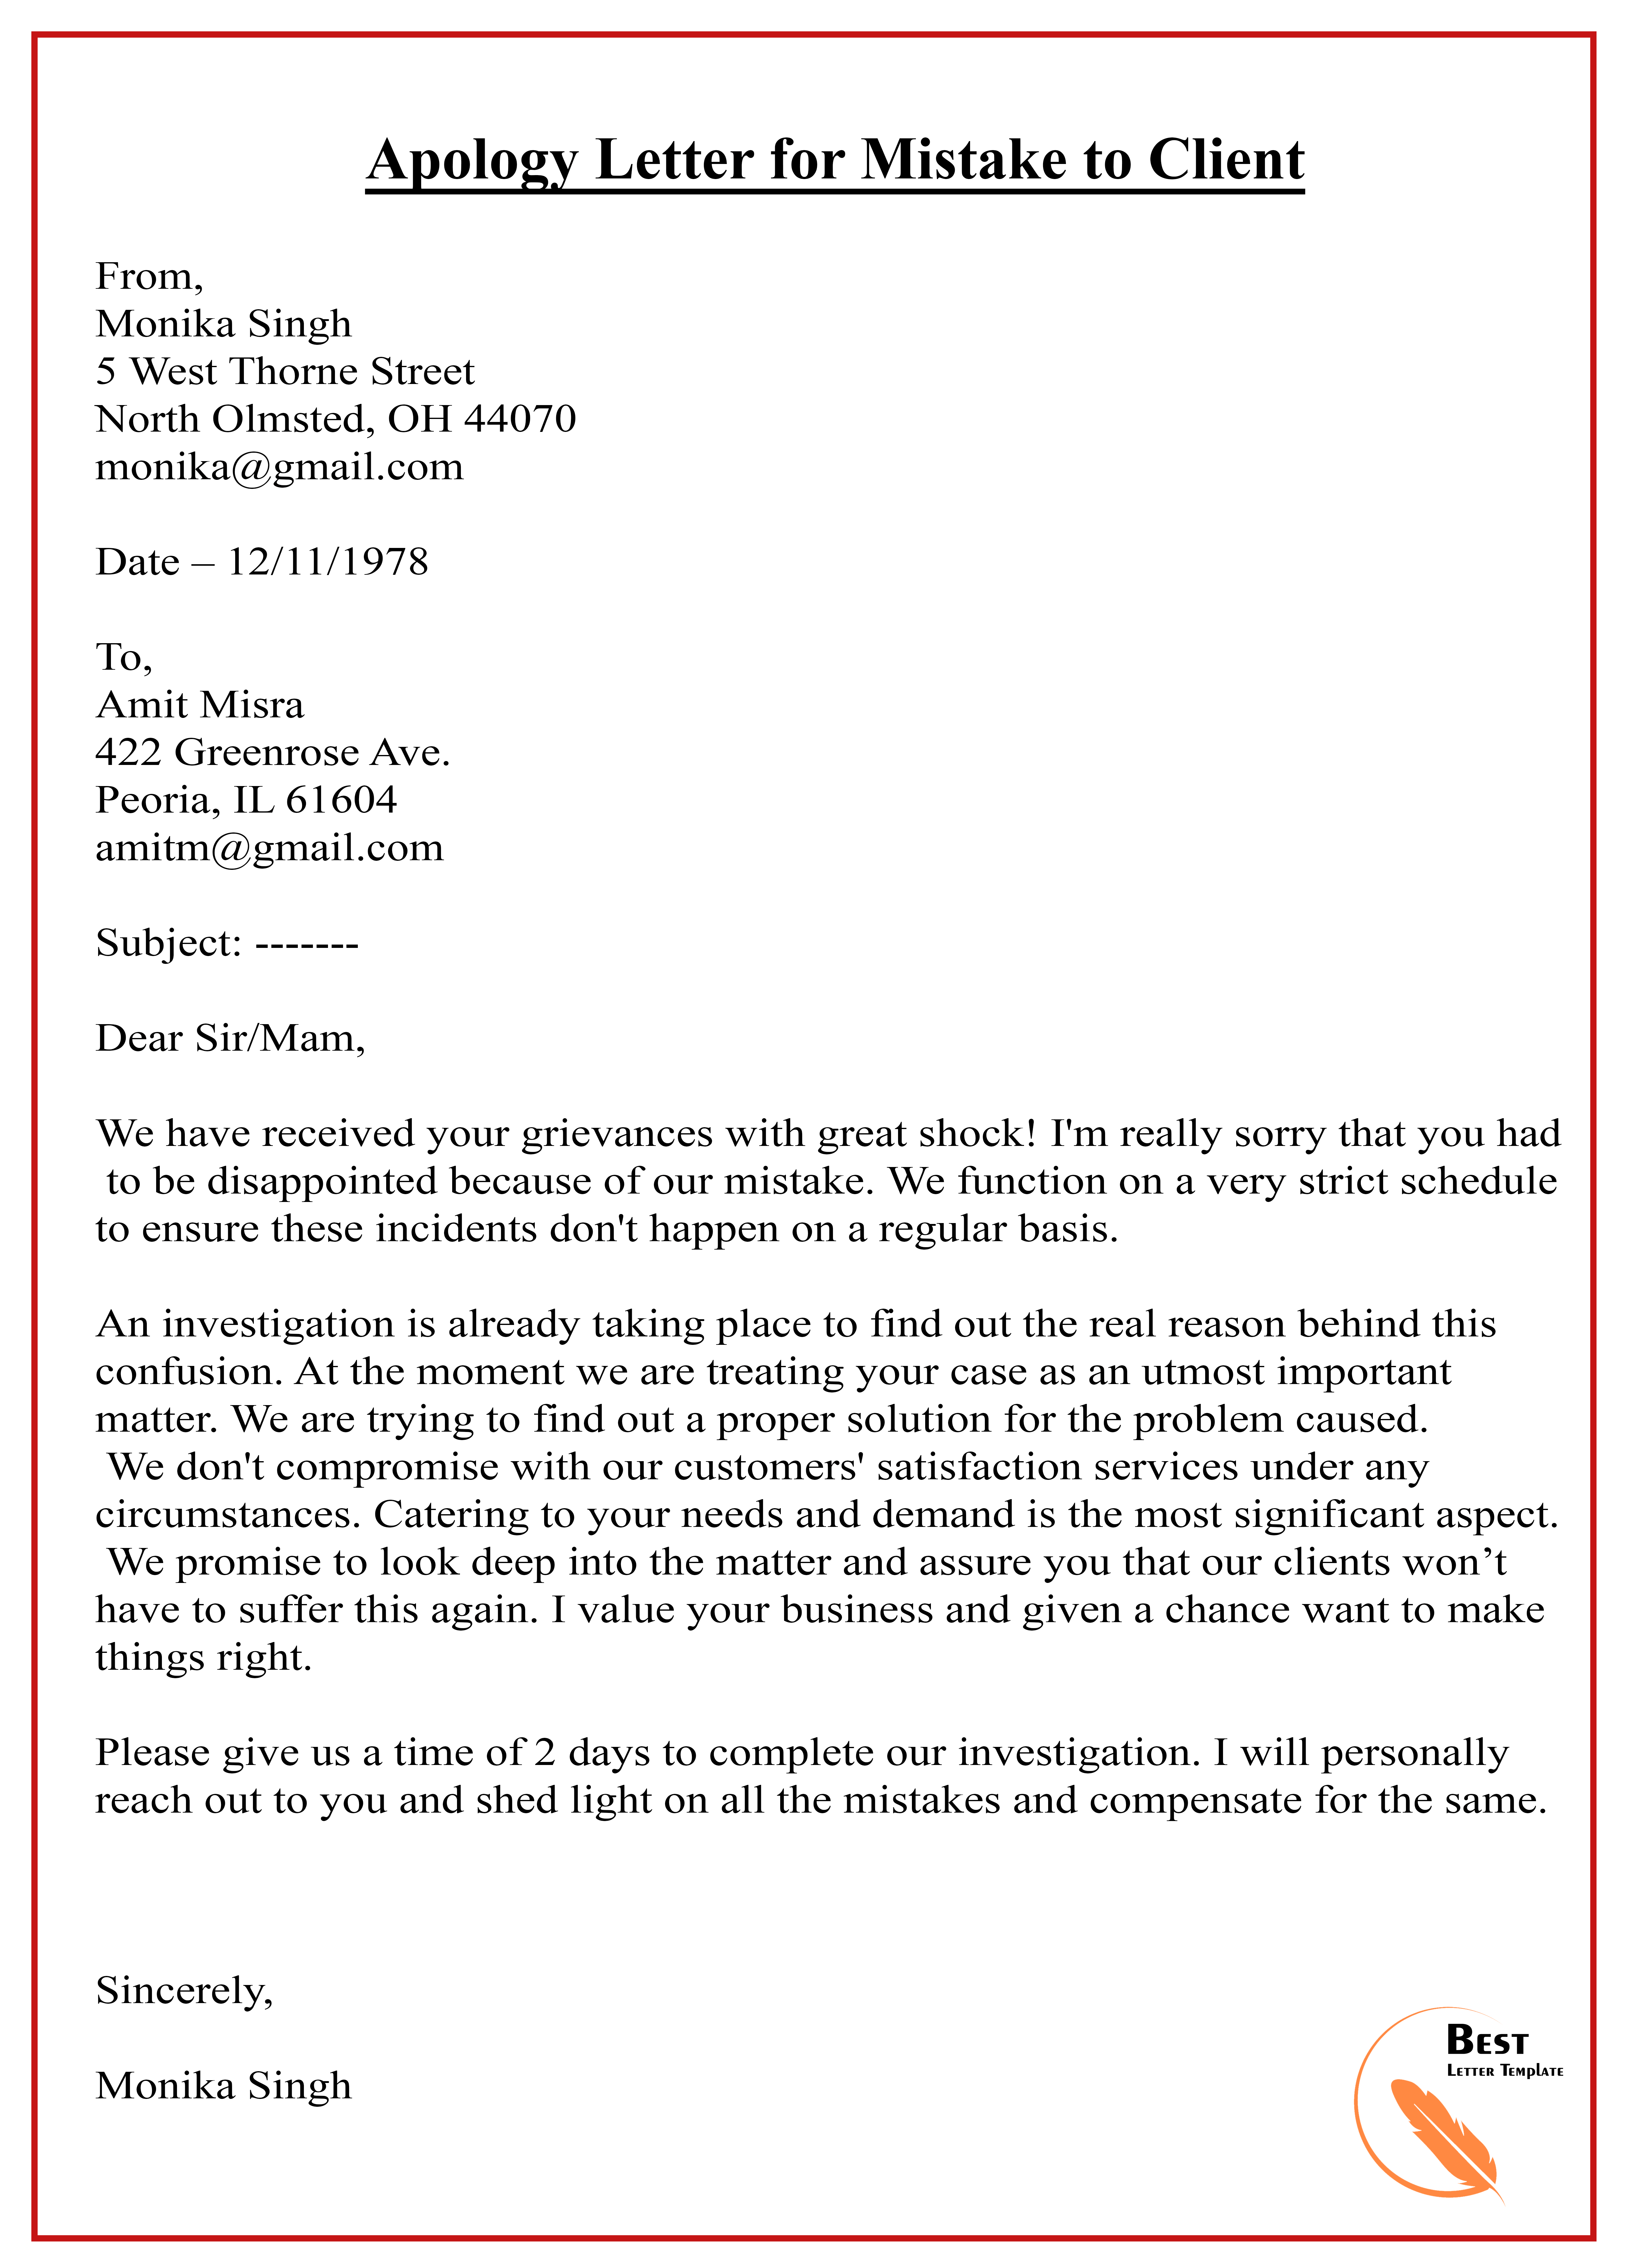 Apology Letter To Customer For Mistake from bestlettertemplate.com